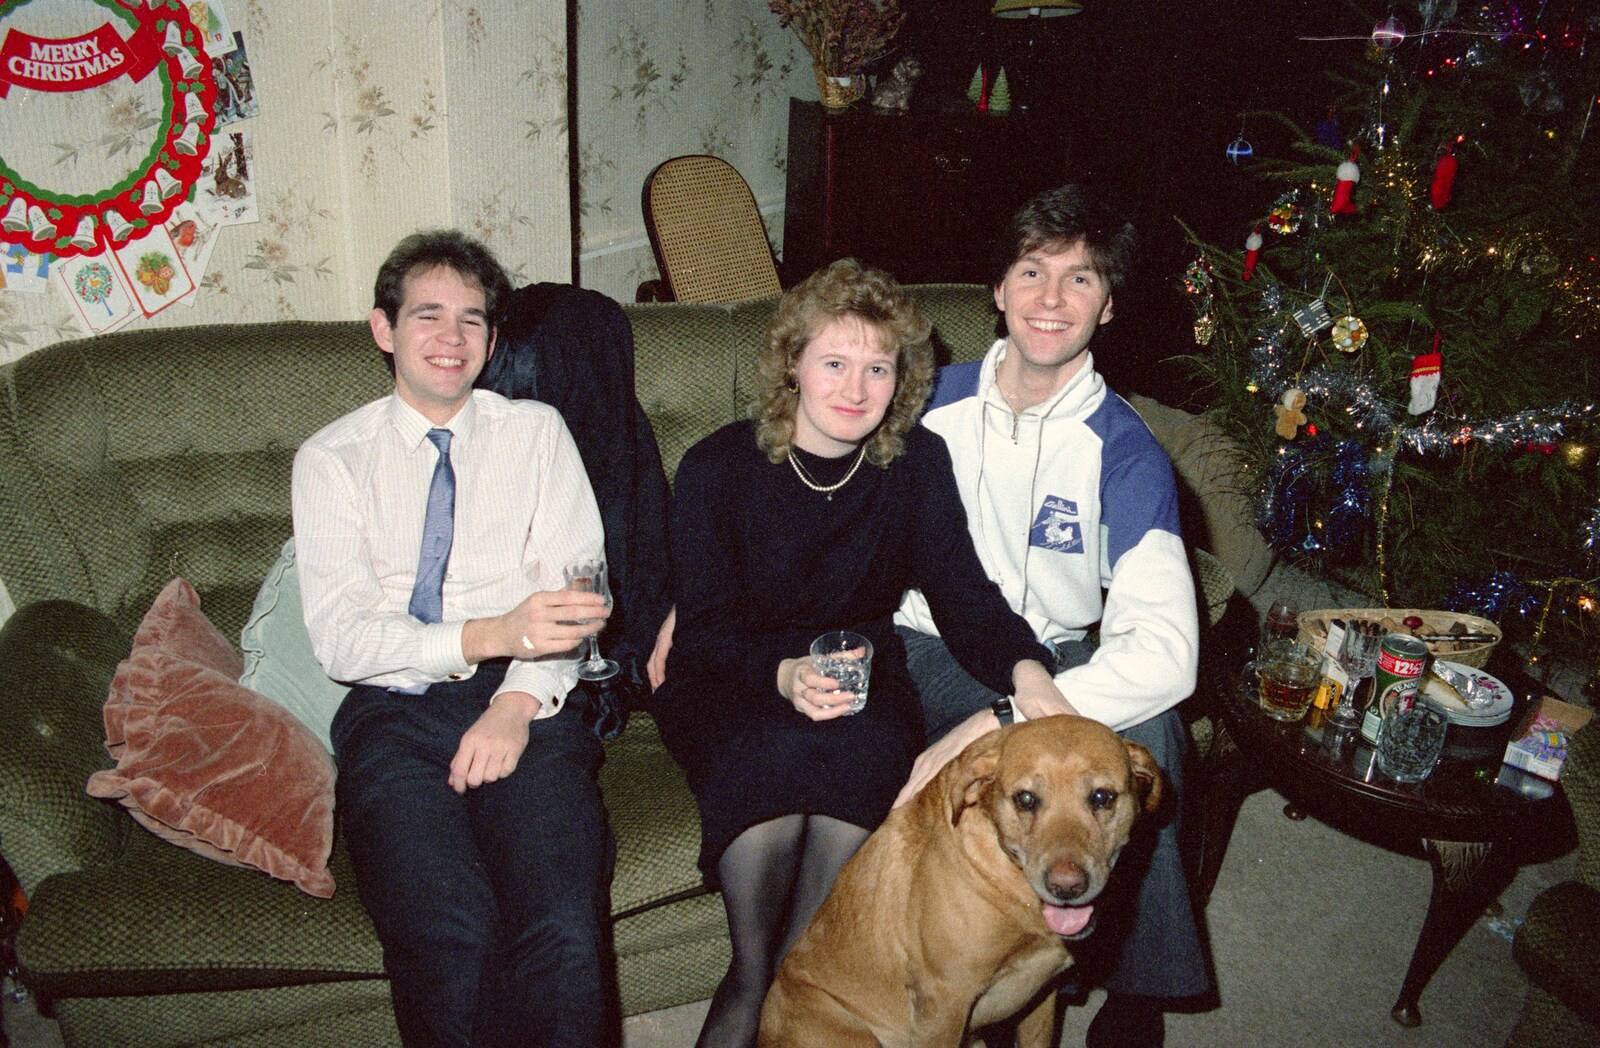 Phil, Maria and Sean from New Year's Eve at Hamish's, New Milton, Hampshire - 31st December 1988